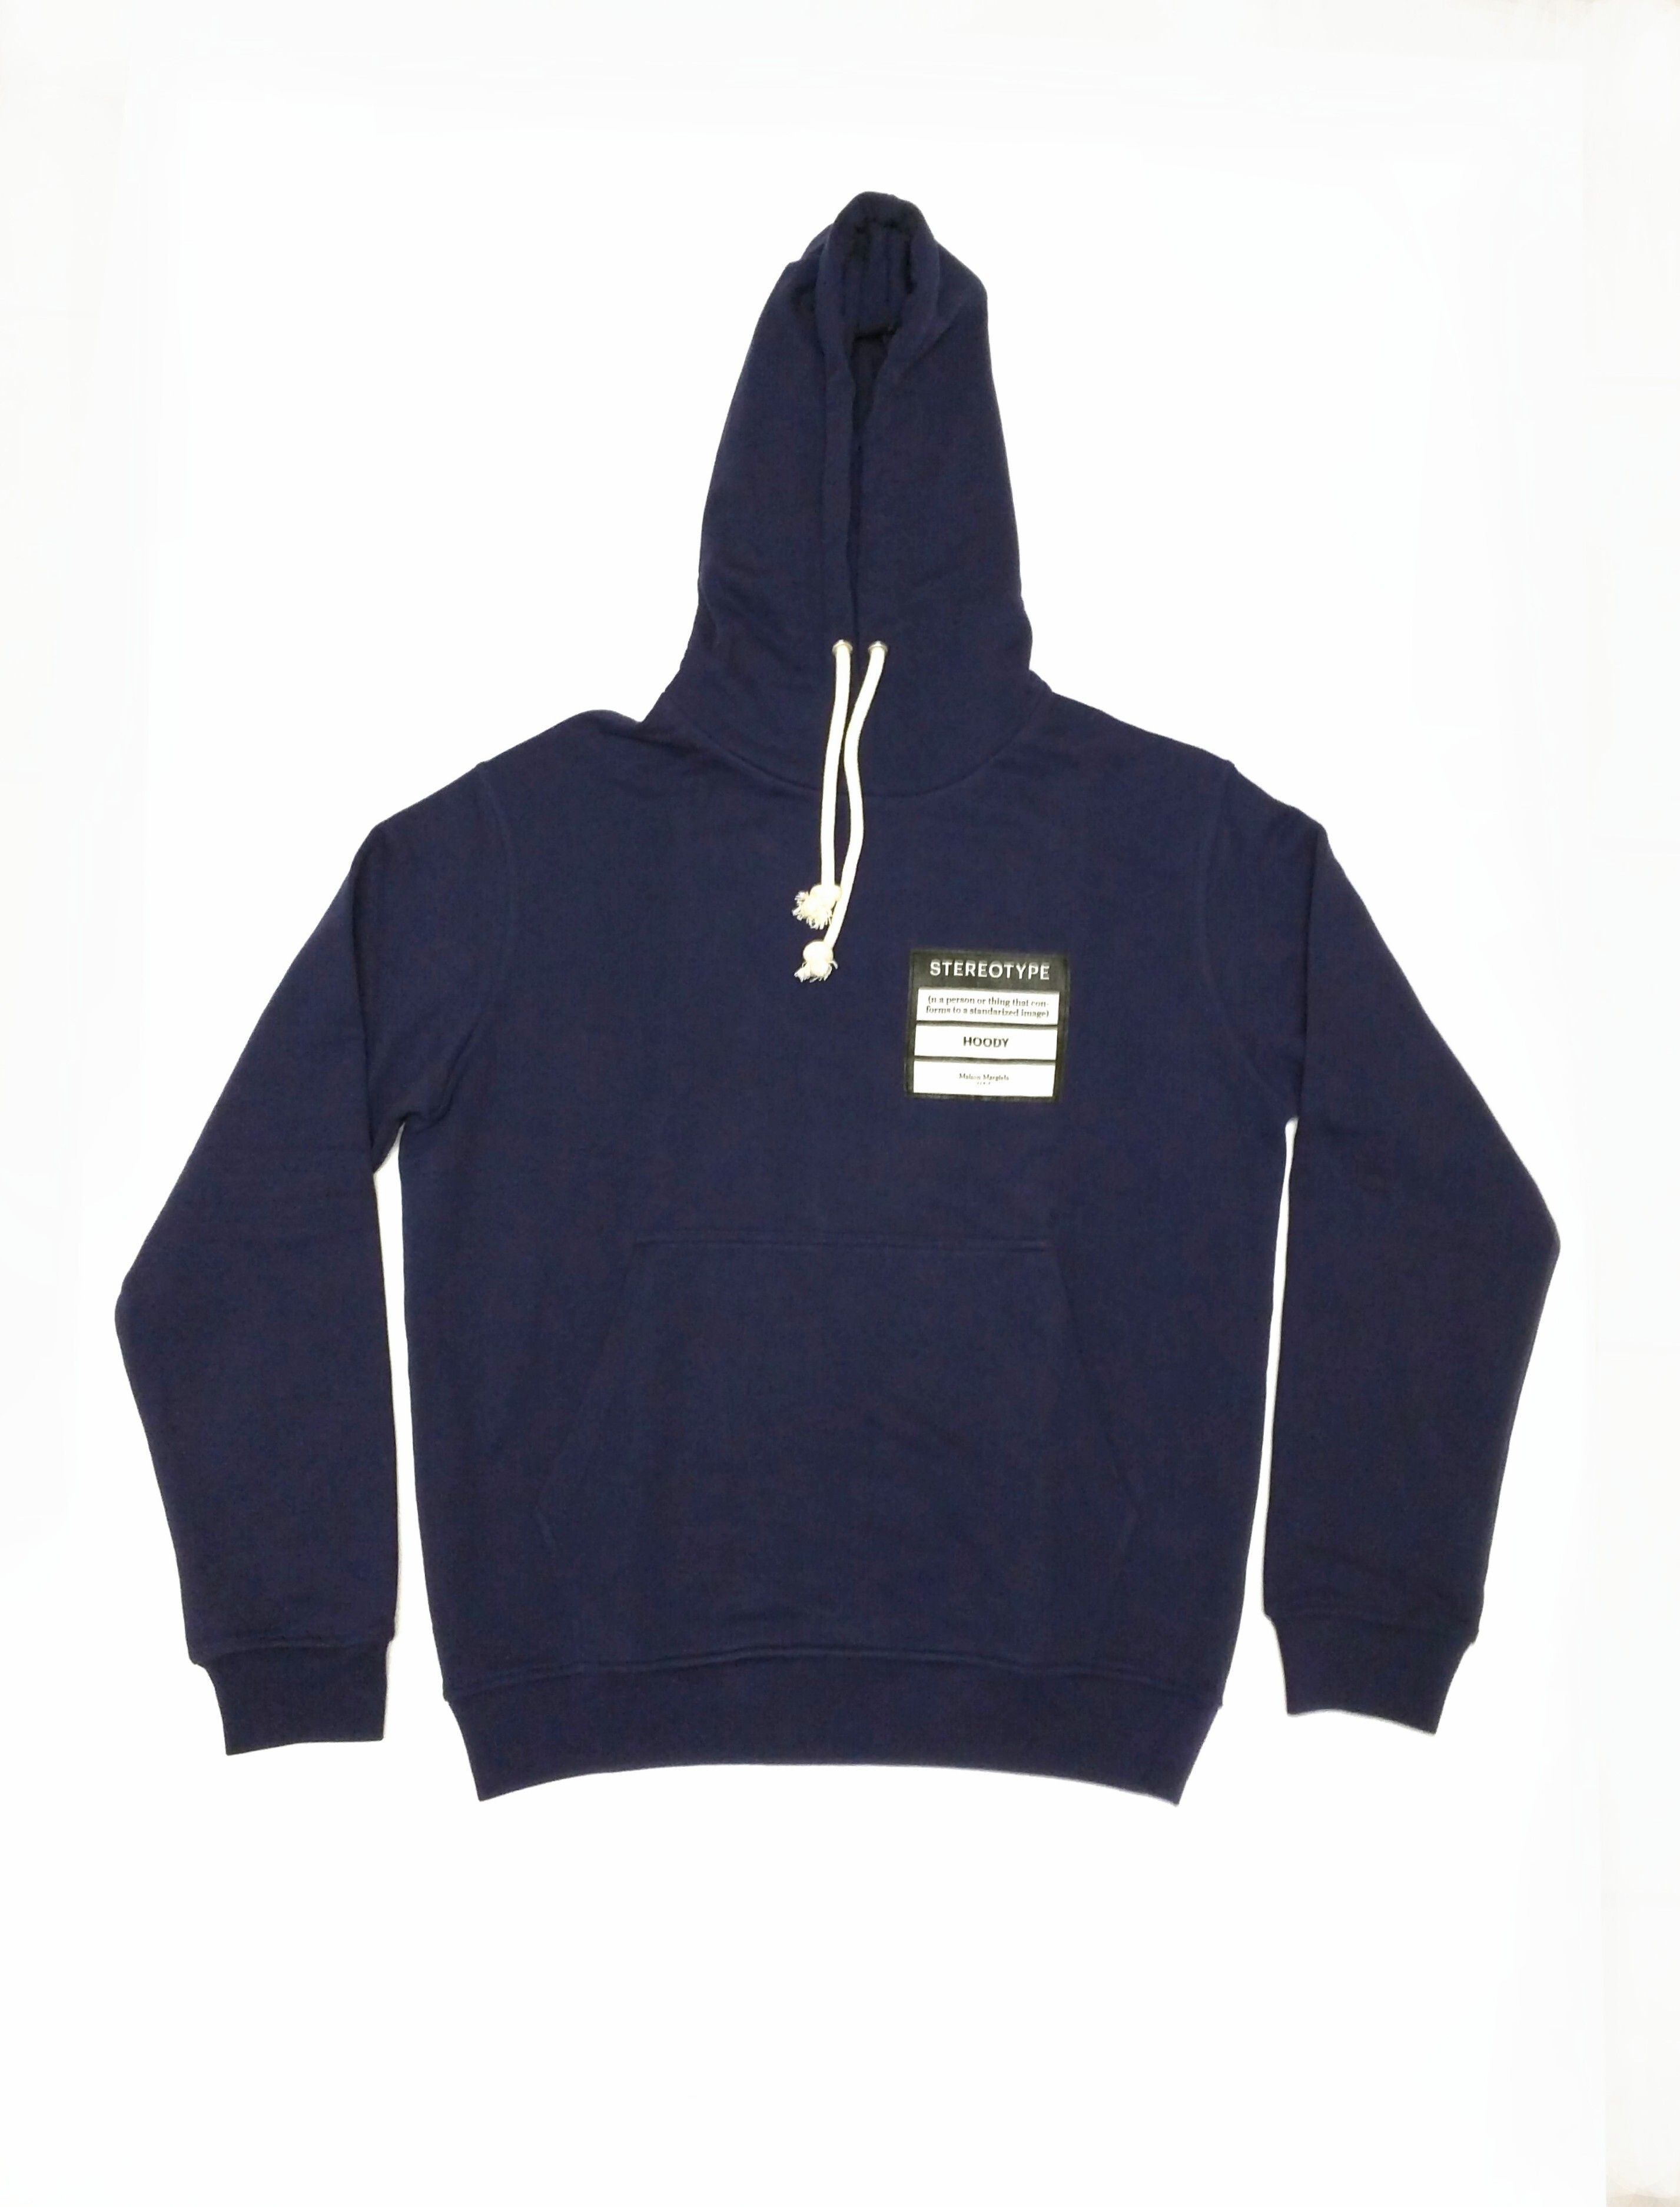 Maison Margiela Stereotype Hoodie Navy Blue 48 MMM Pullover Size US L / EU 52-54 / 3 - 1 Preview